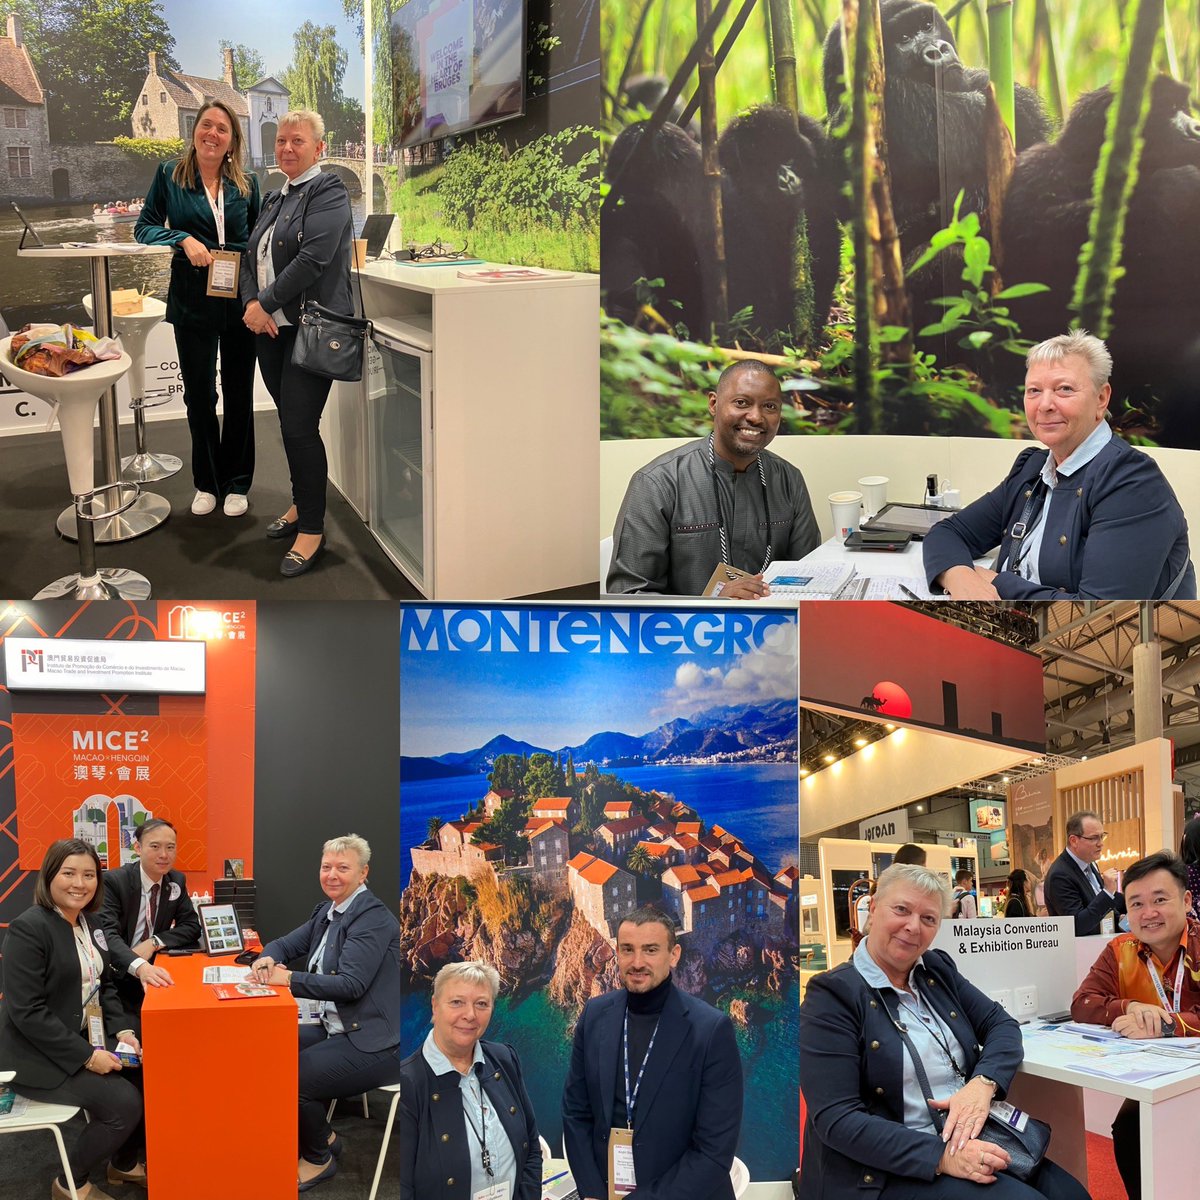 First day at IBTM in Barcelona. Great meetings with interesting destinations for our future worldwide MICE business …
#ccmg #mice #meetings #incentives #congress #conference #events #businessevents #travelmarketing #travelrepresentation #ibtm #barcelona